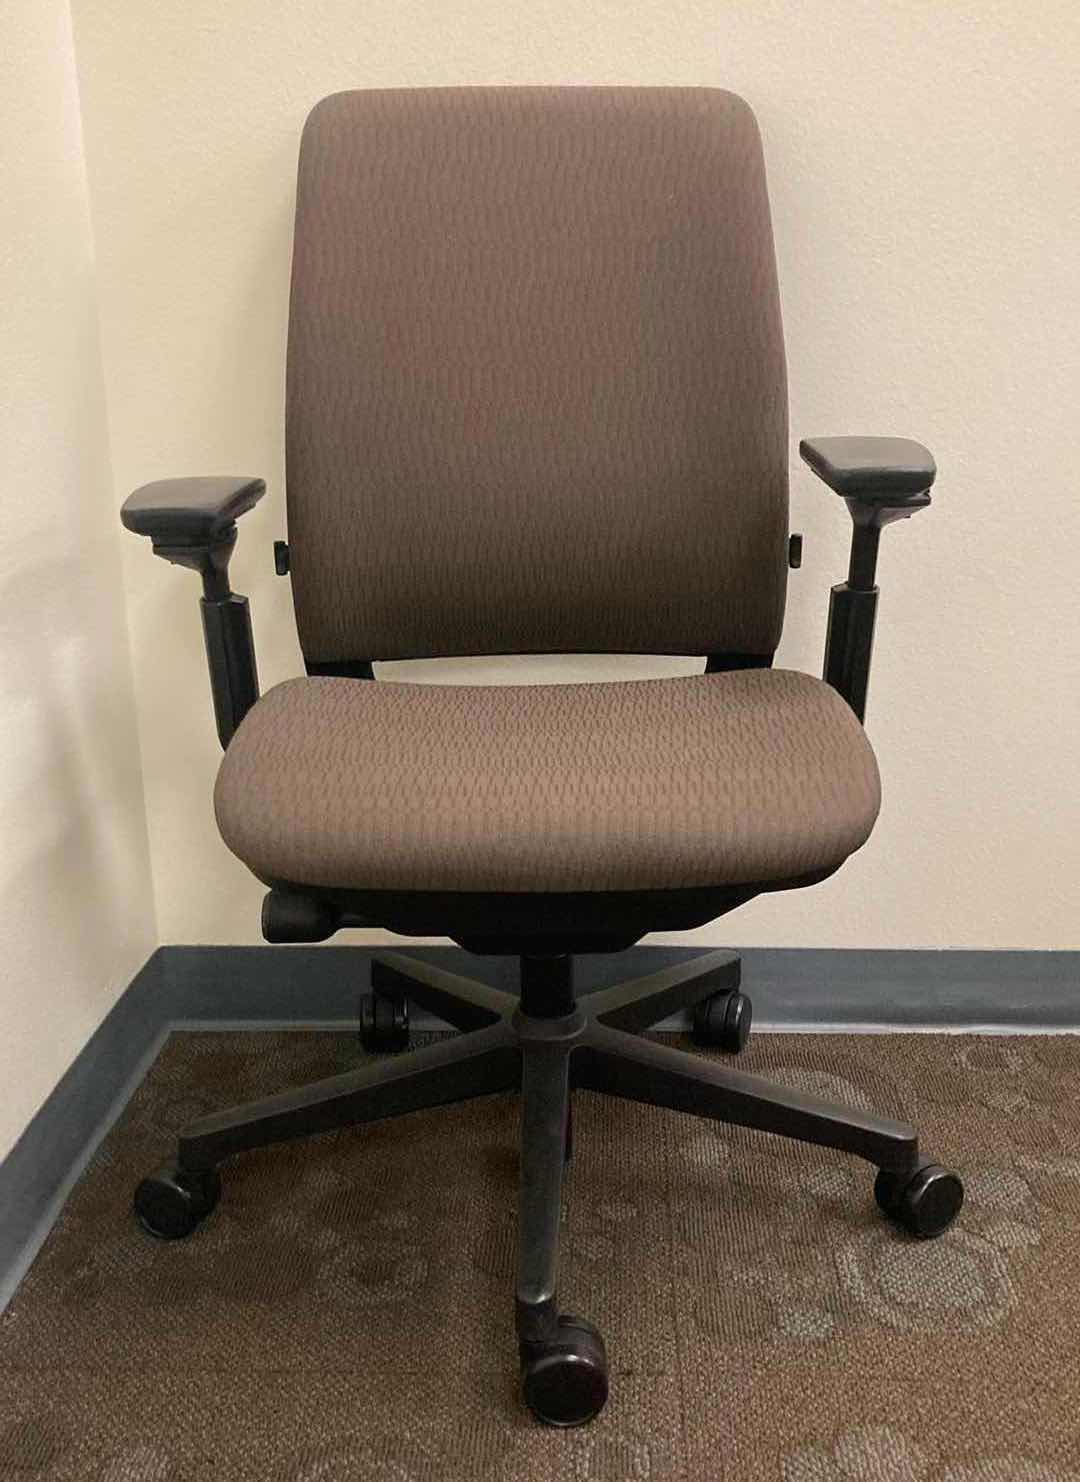 Photo 1 of STEELCASE AMIA BROWN SWIVEL OFFICE CHAIR 21.25” X 27.5” H36.5-42”